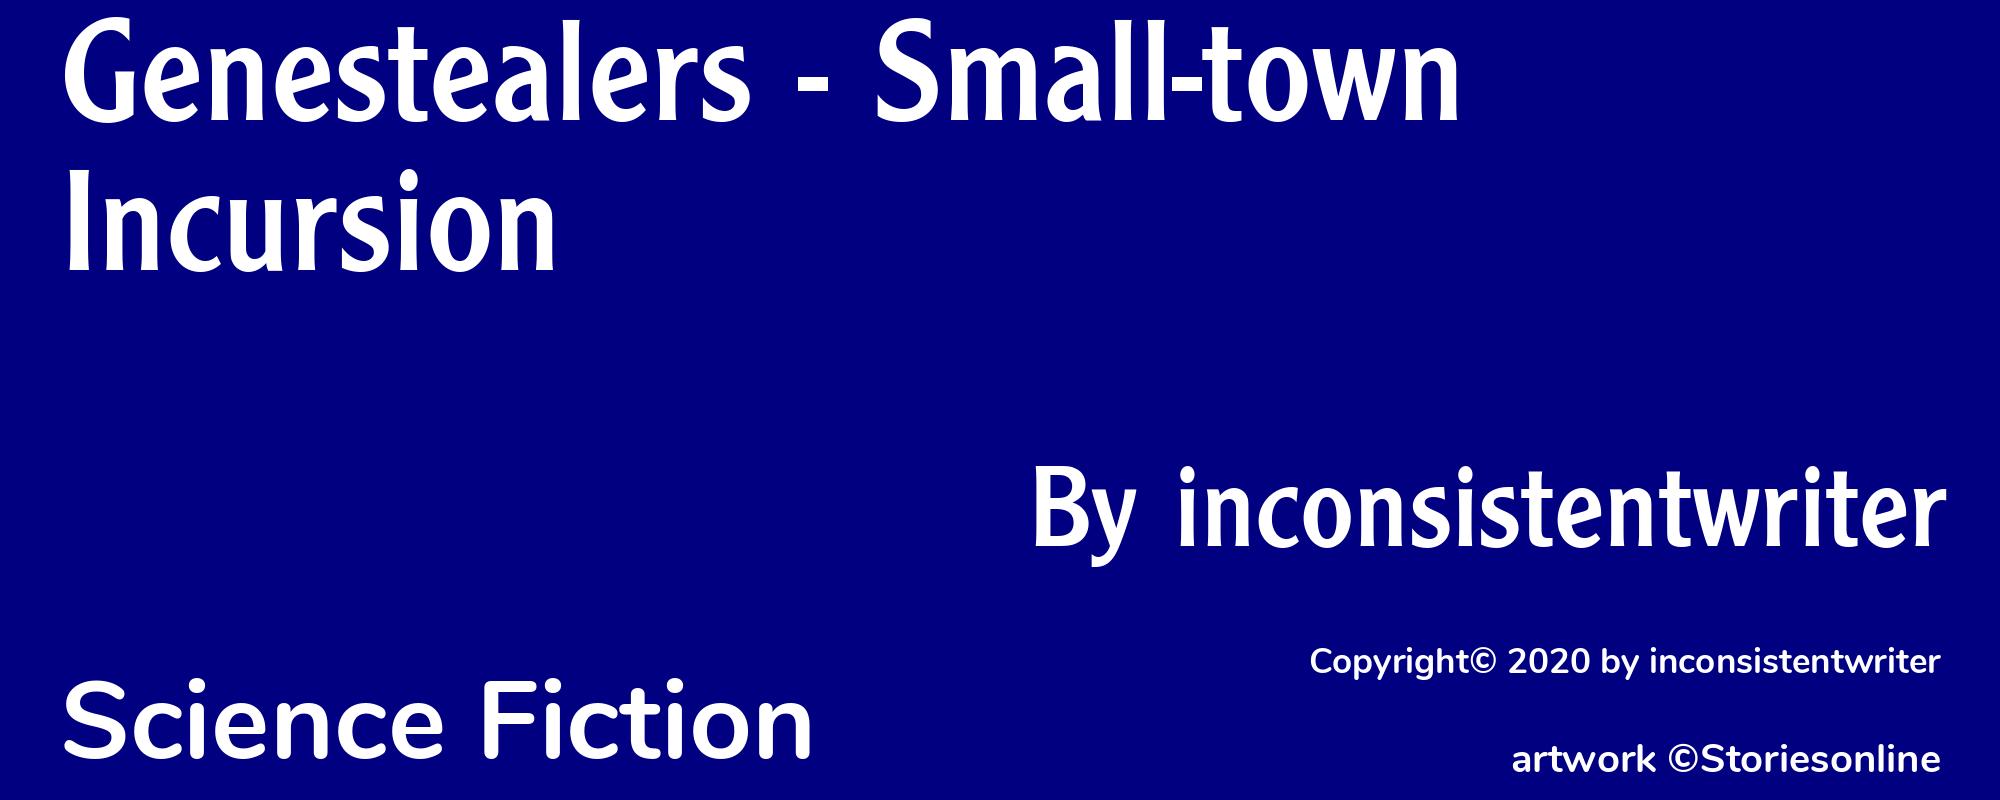 Genestealers - Small-town Incursion - Cover